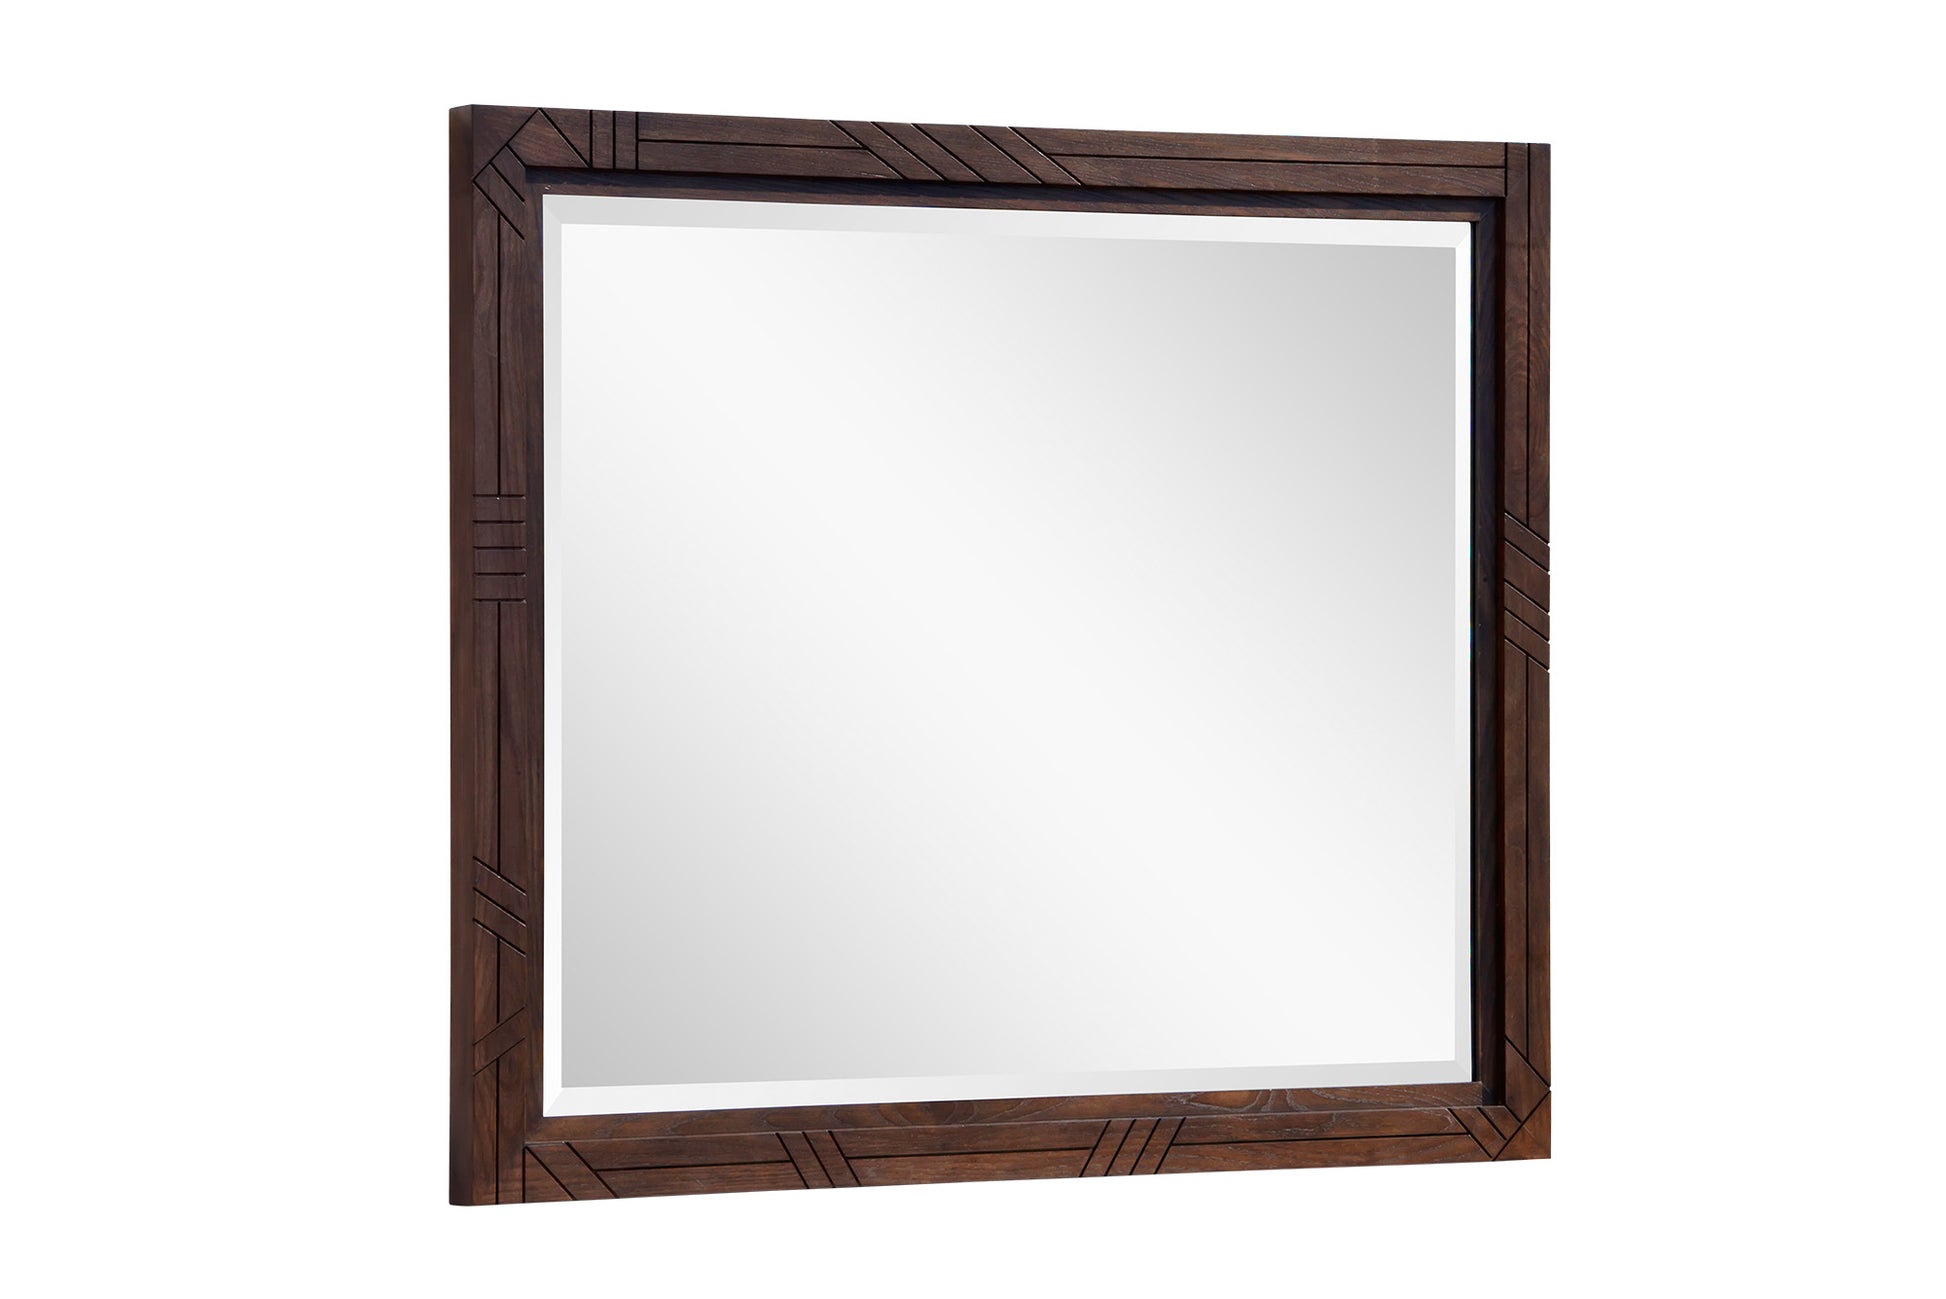 Stained wood frame